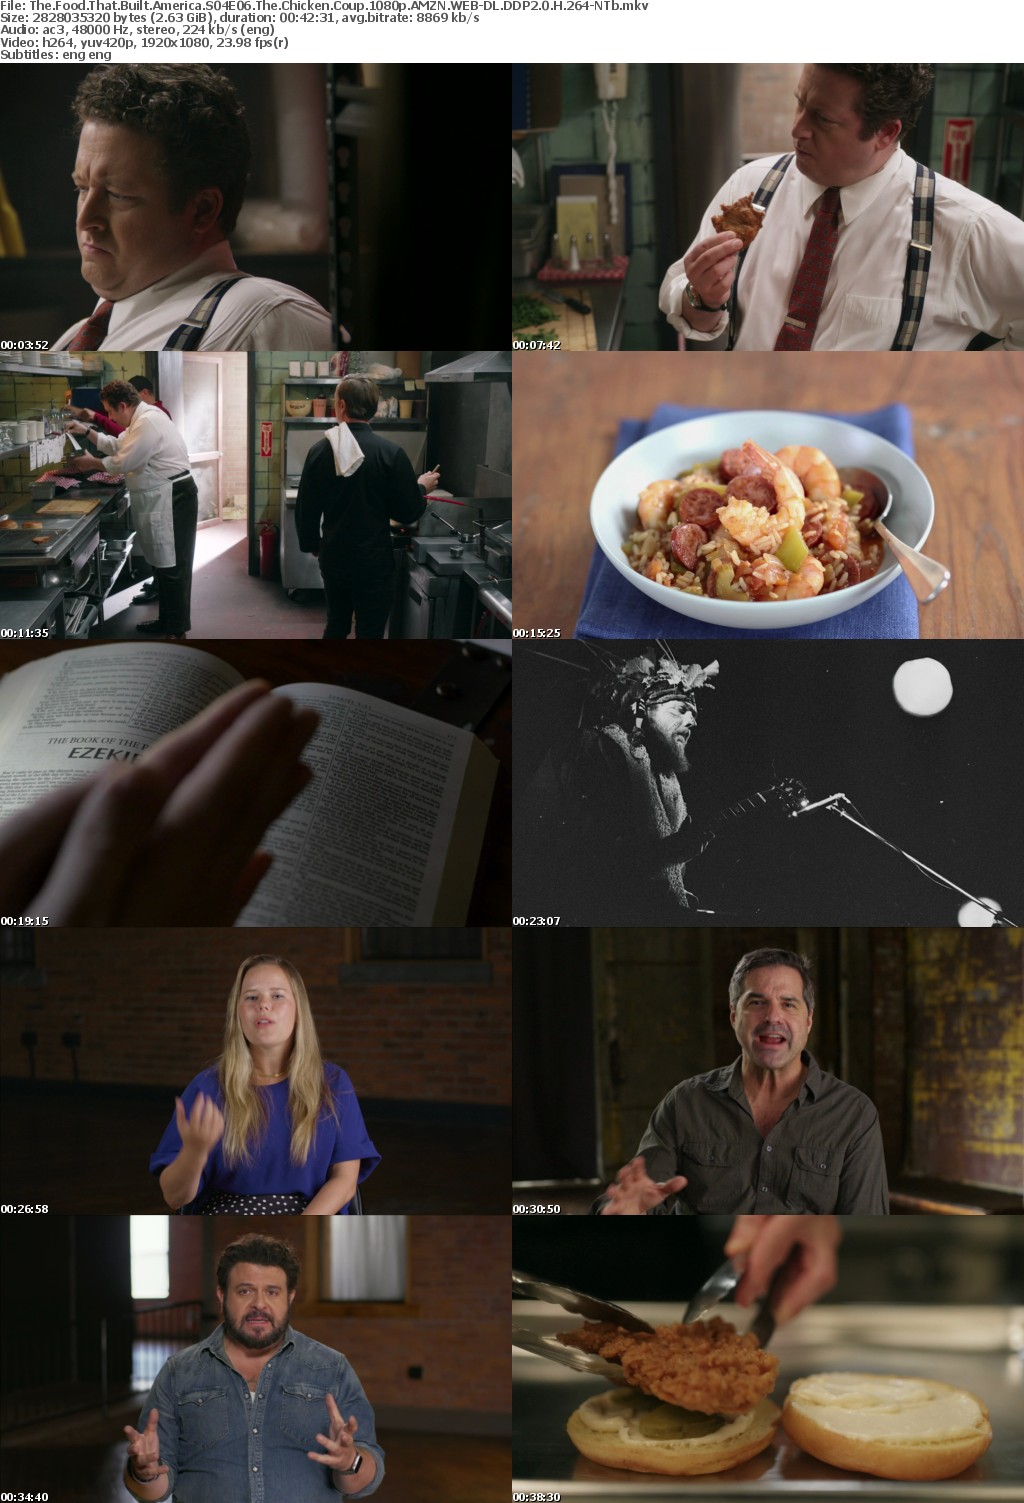 The Food That Built America S04E06 The Chicken Coup 1080p AMZN WEB-DL DDP2 0 H 264-NTb